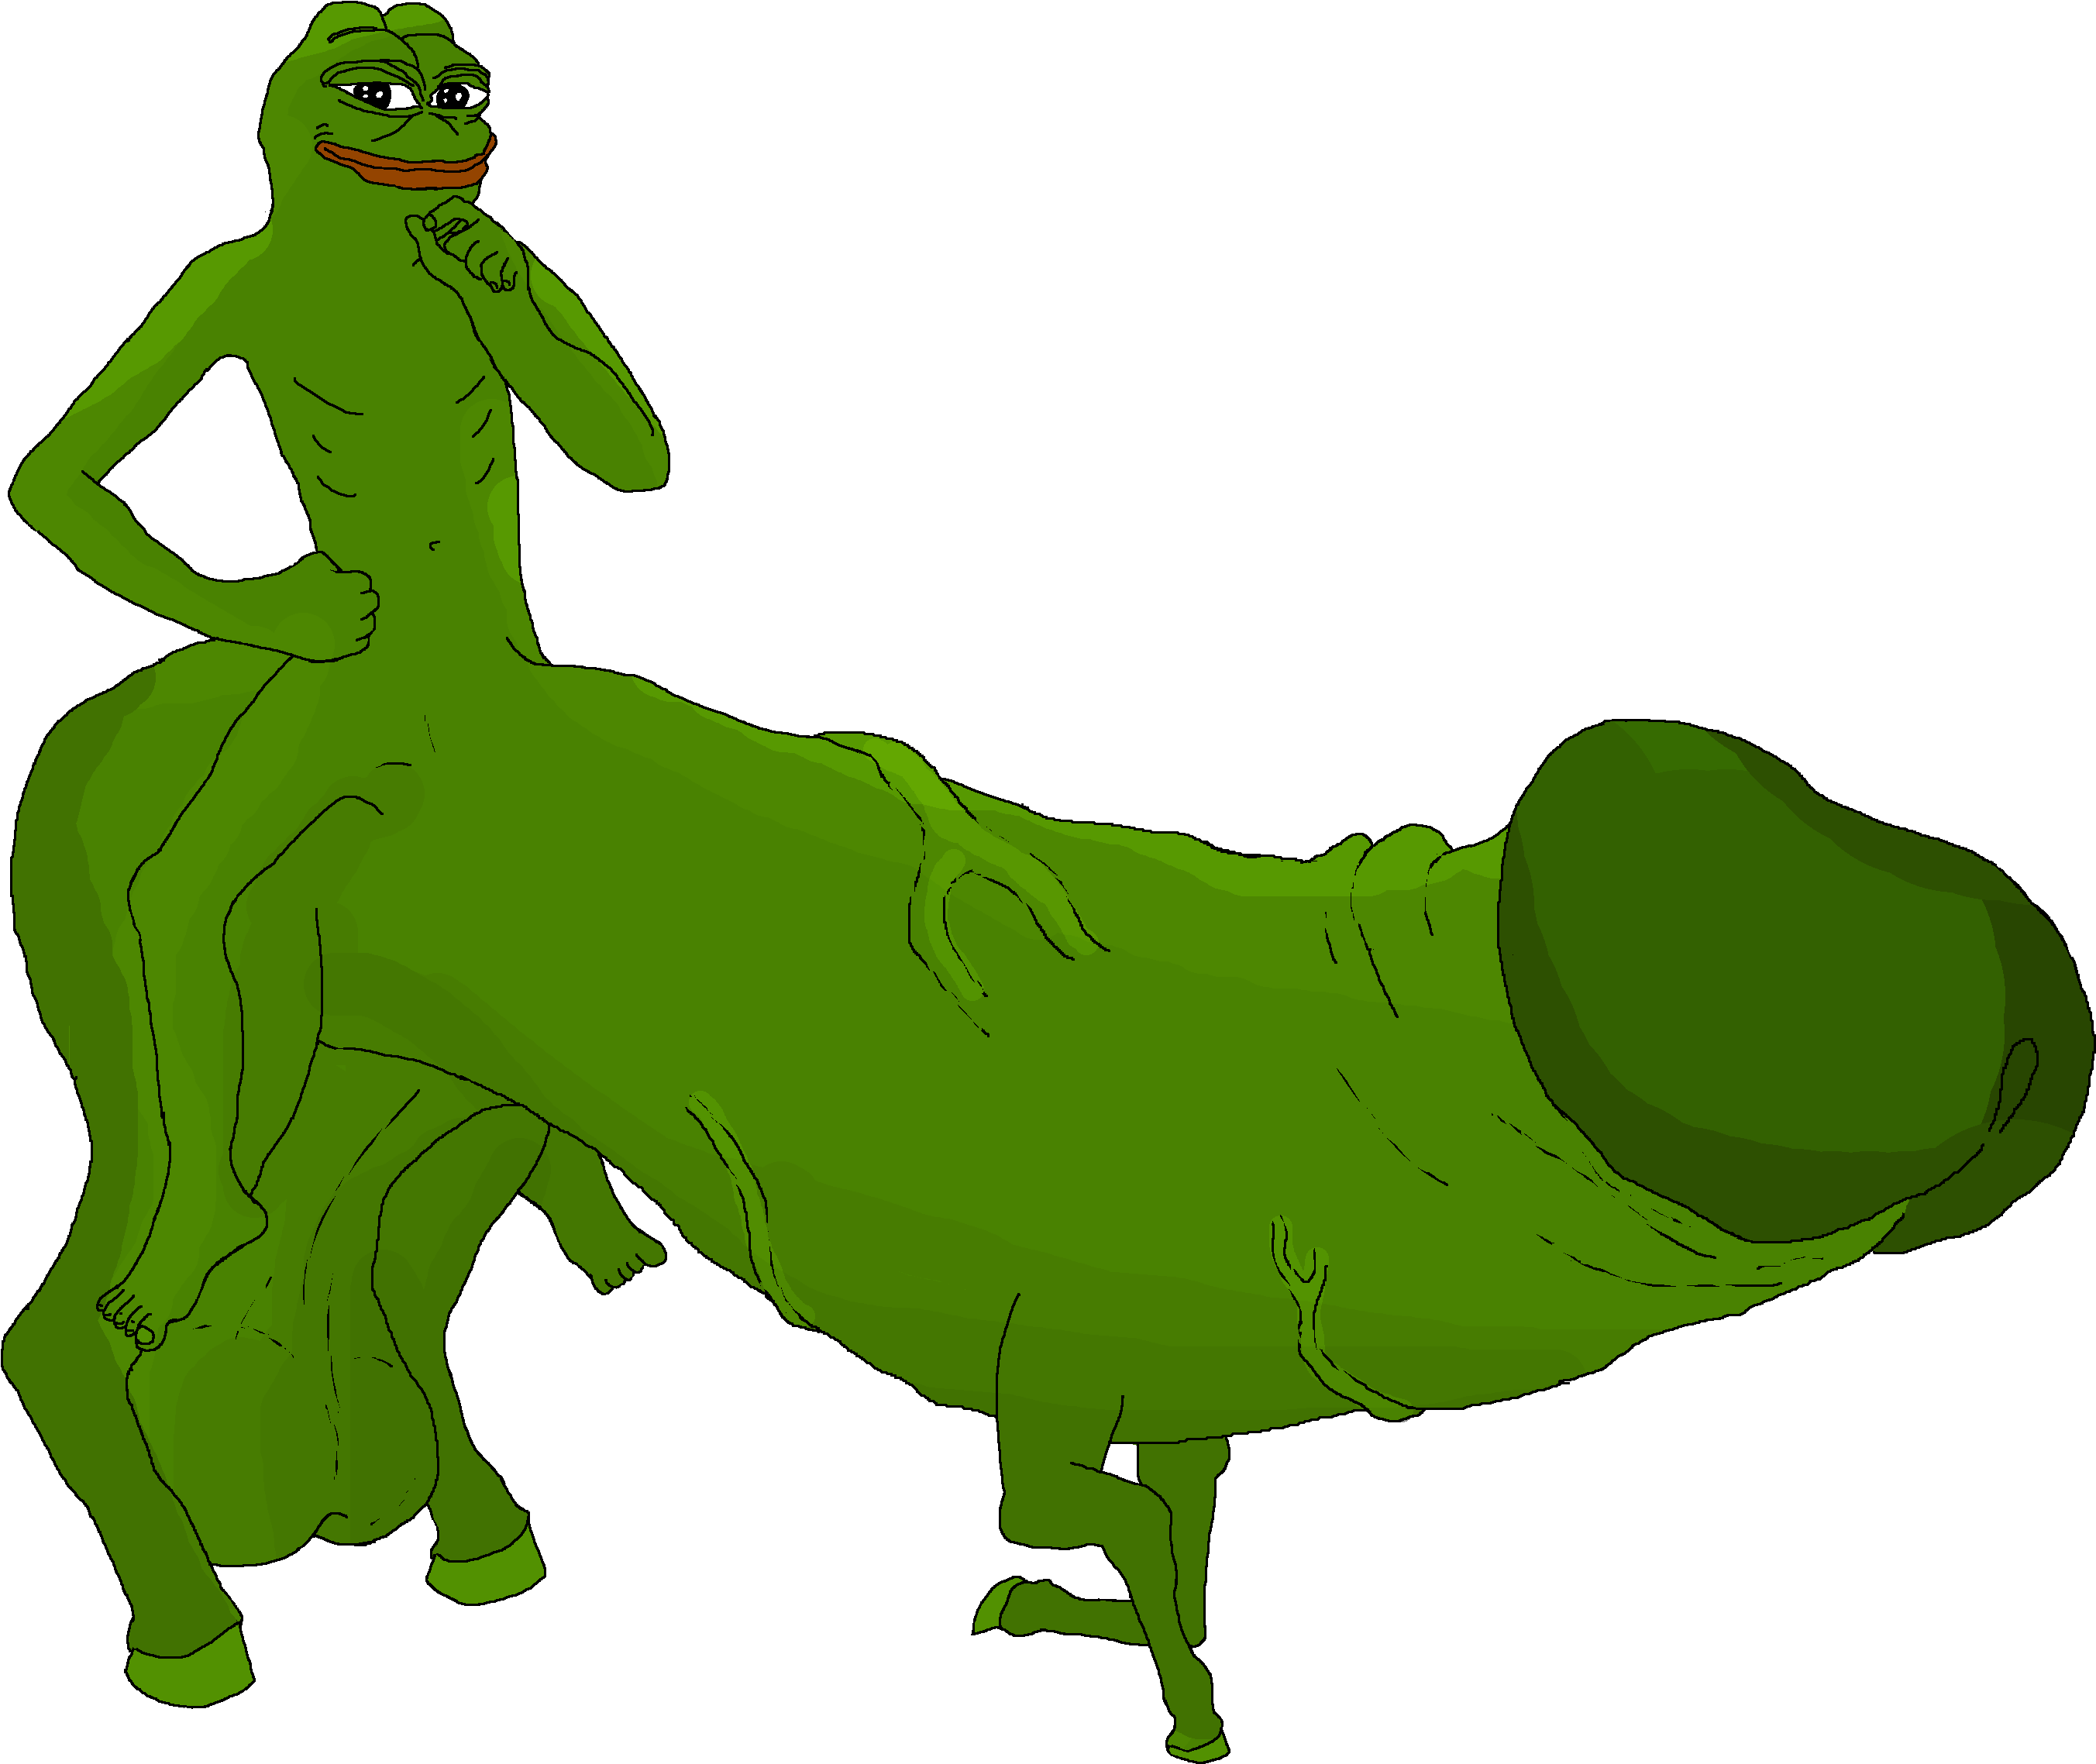 1640431463_14-xphoto-name-p-pepe-the-frog-porn-18.png